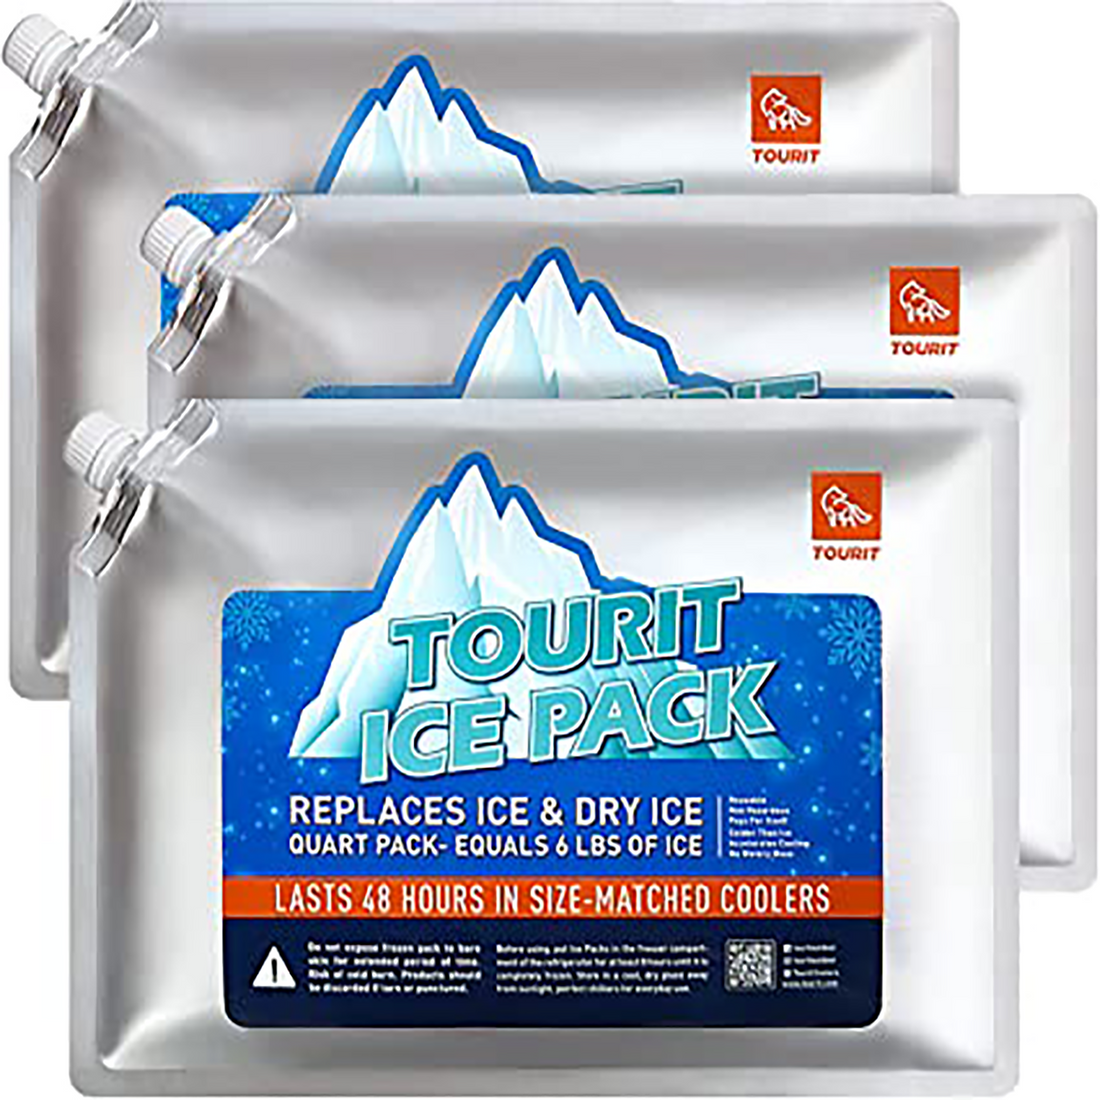 Reusable Long Lasting Ice Pack for